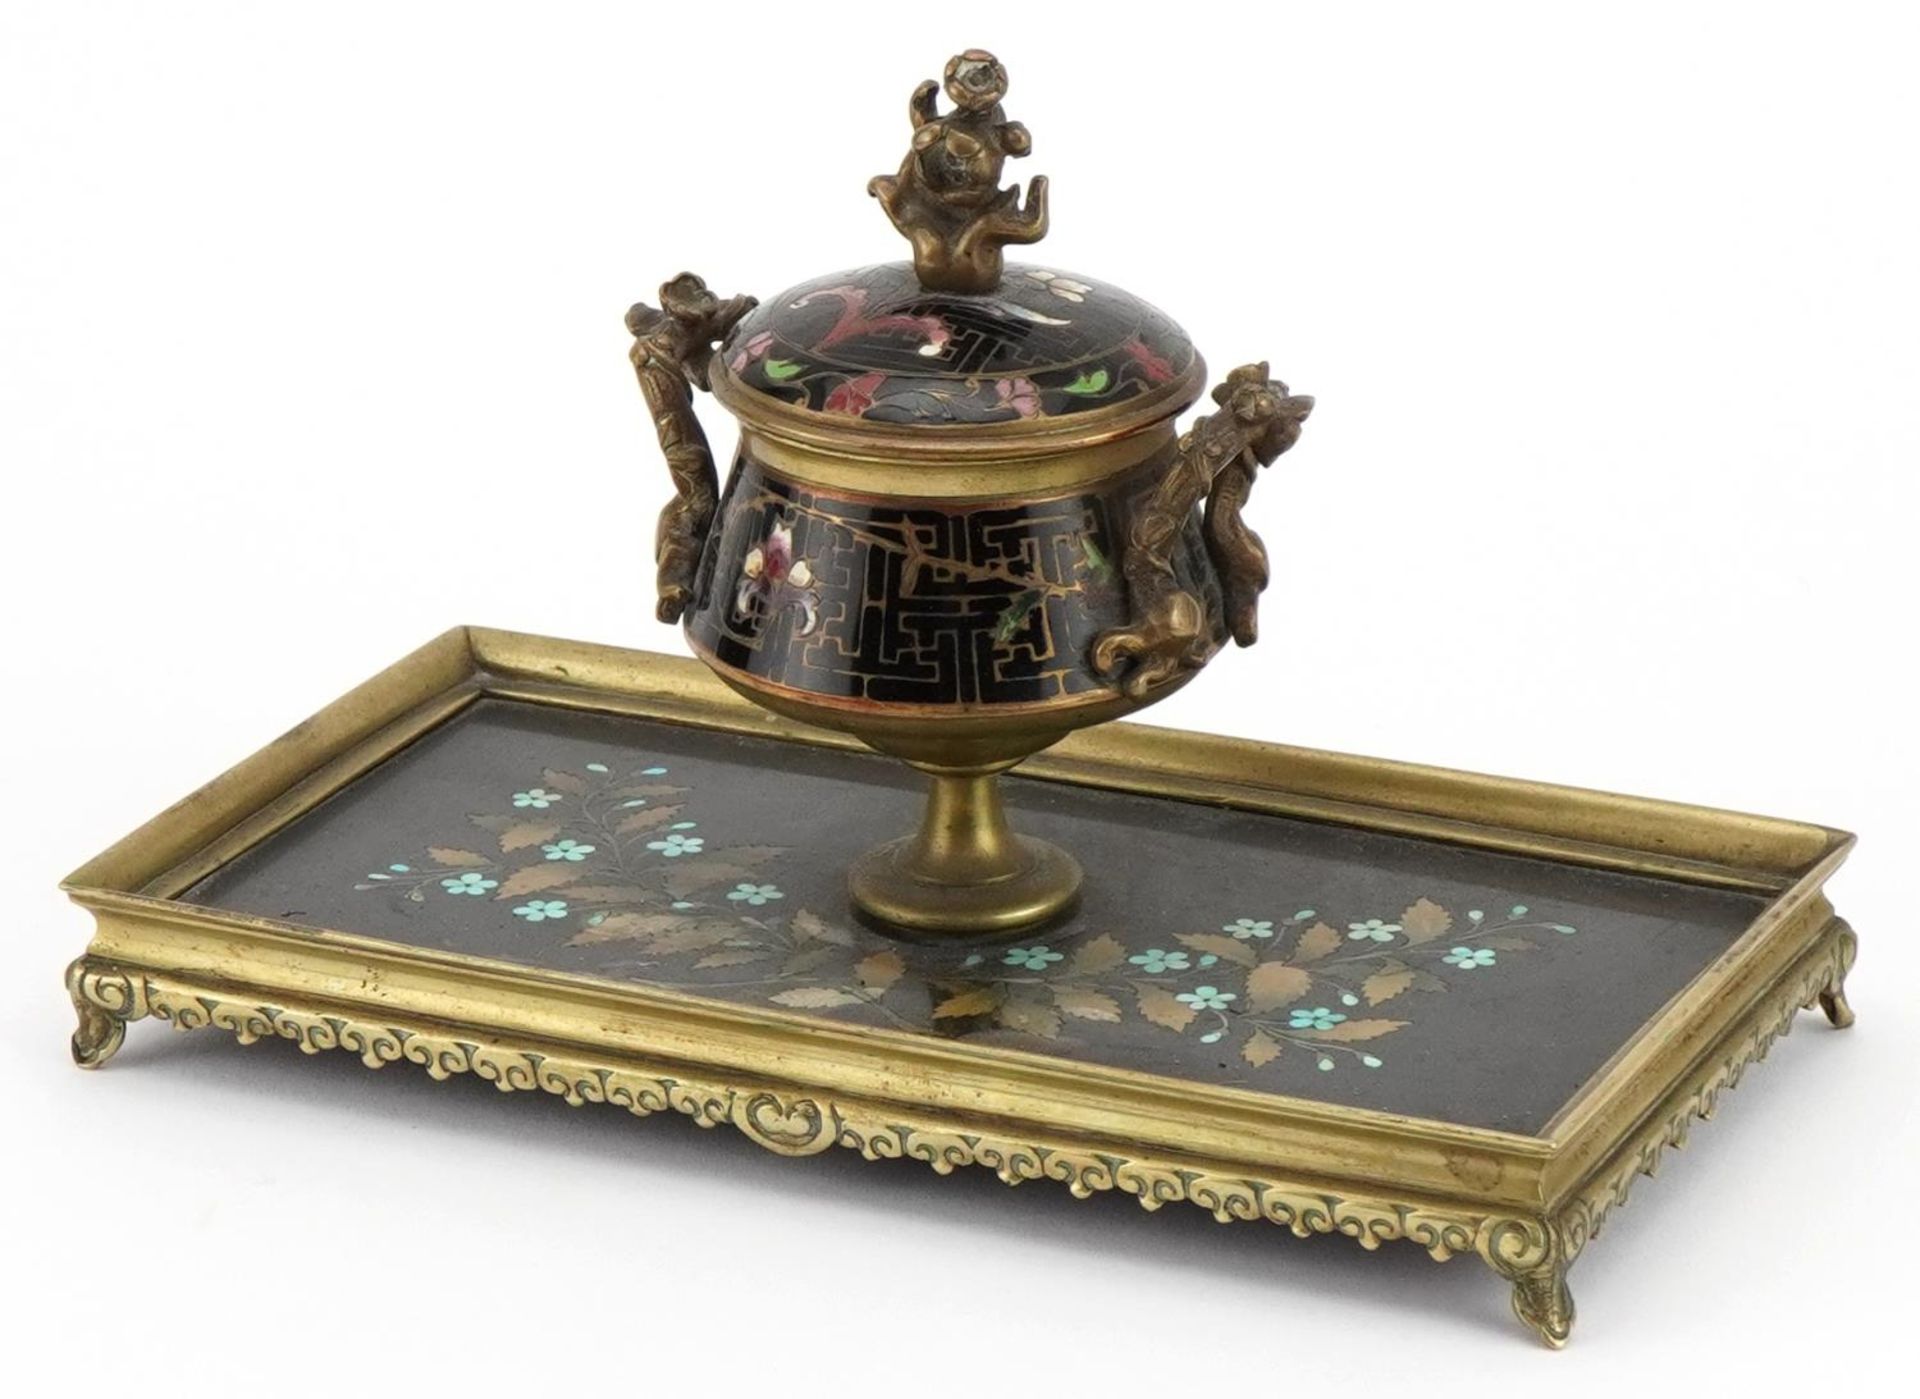 19th century ornate brass pietra dura and cloisonne desk inkwell with glass liner finely inlaid